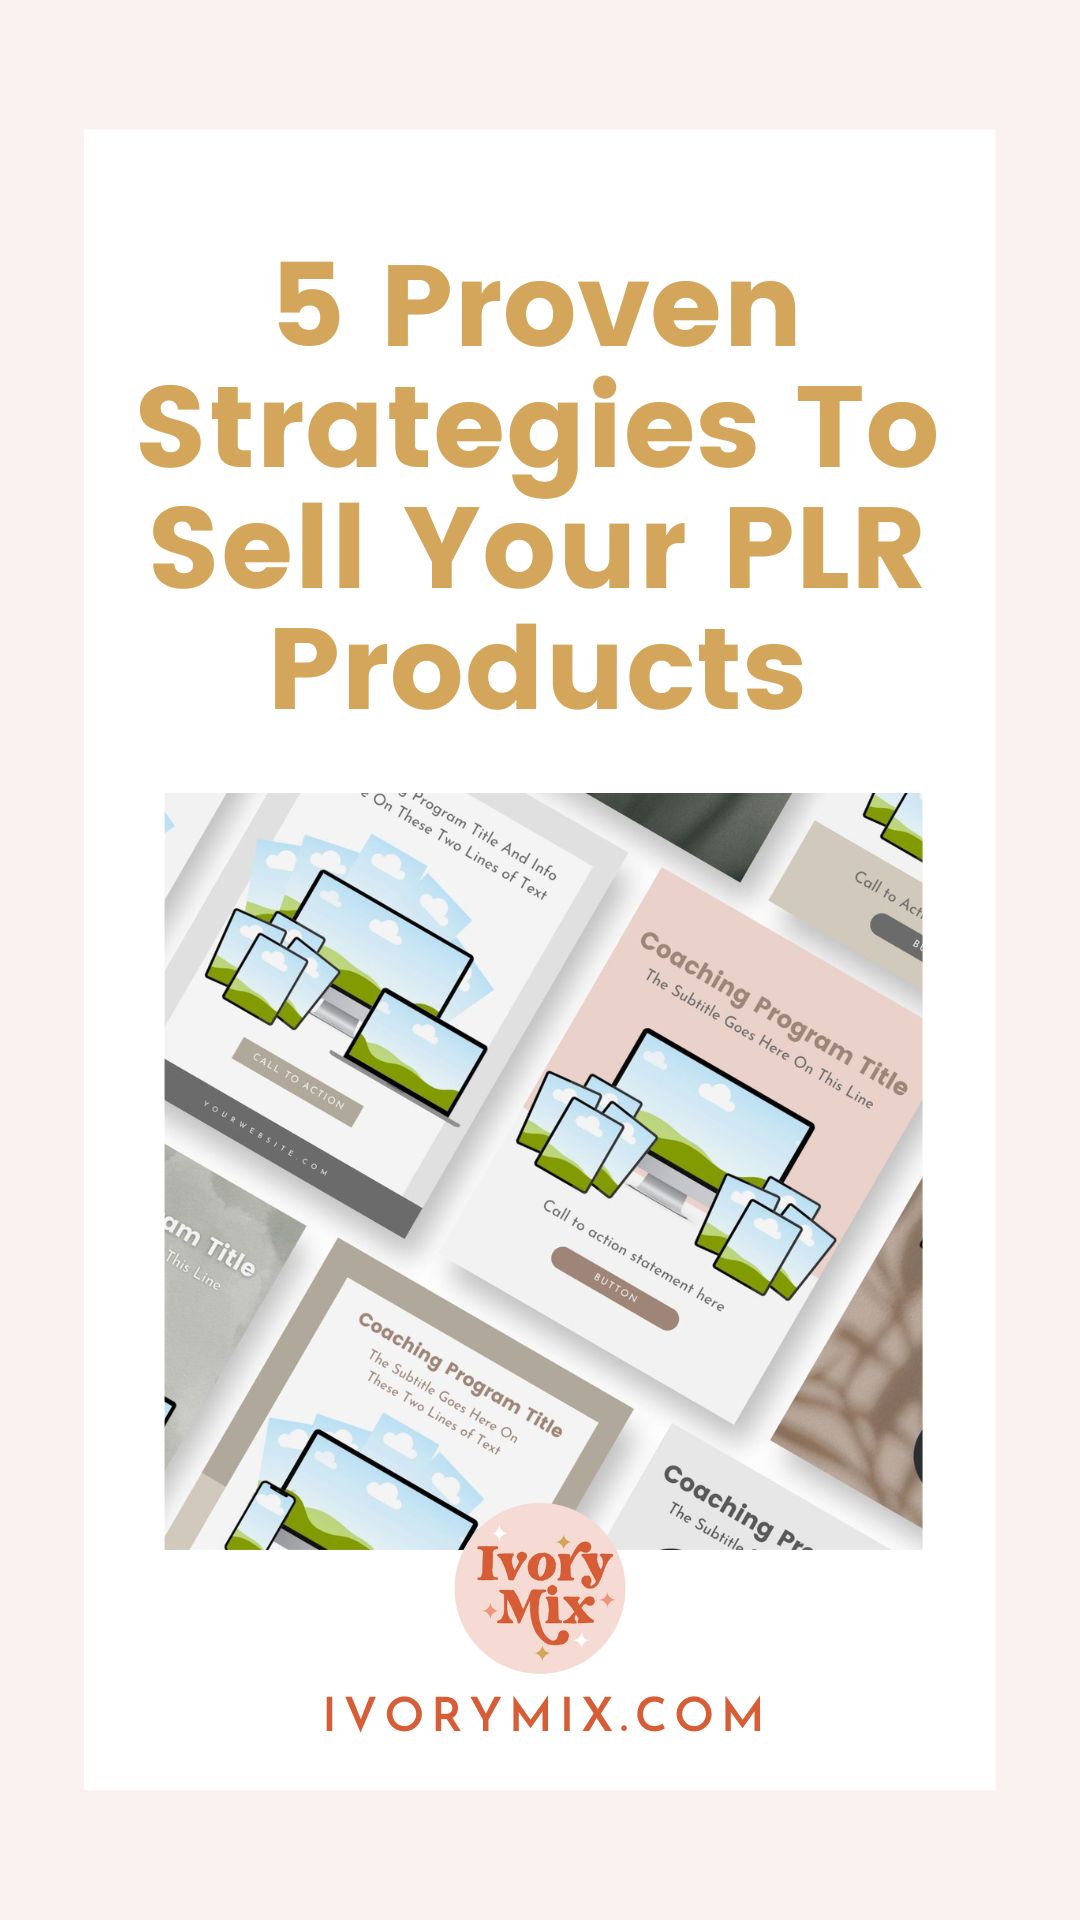 5 proven strategies To sell your PLR products